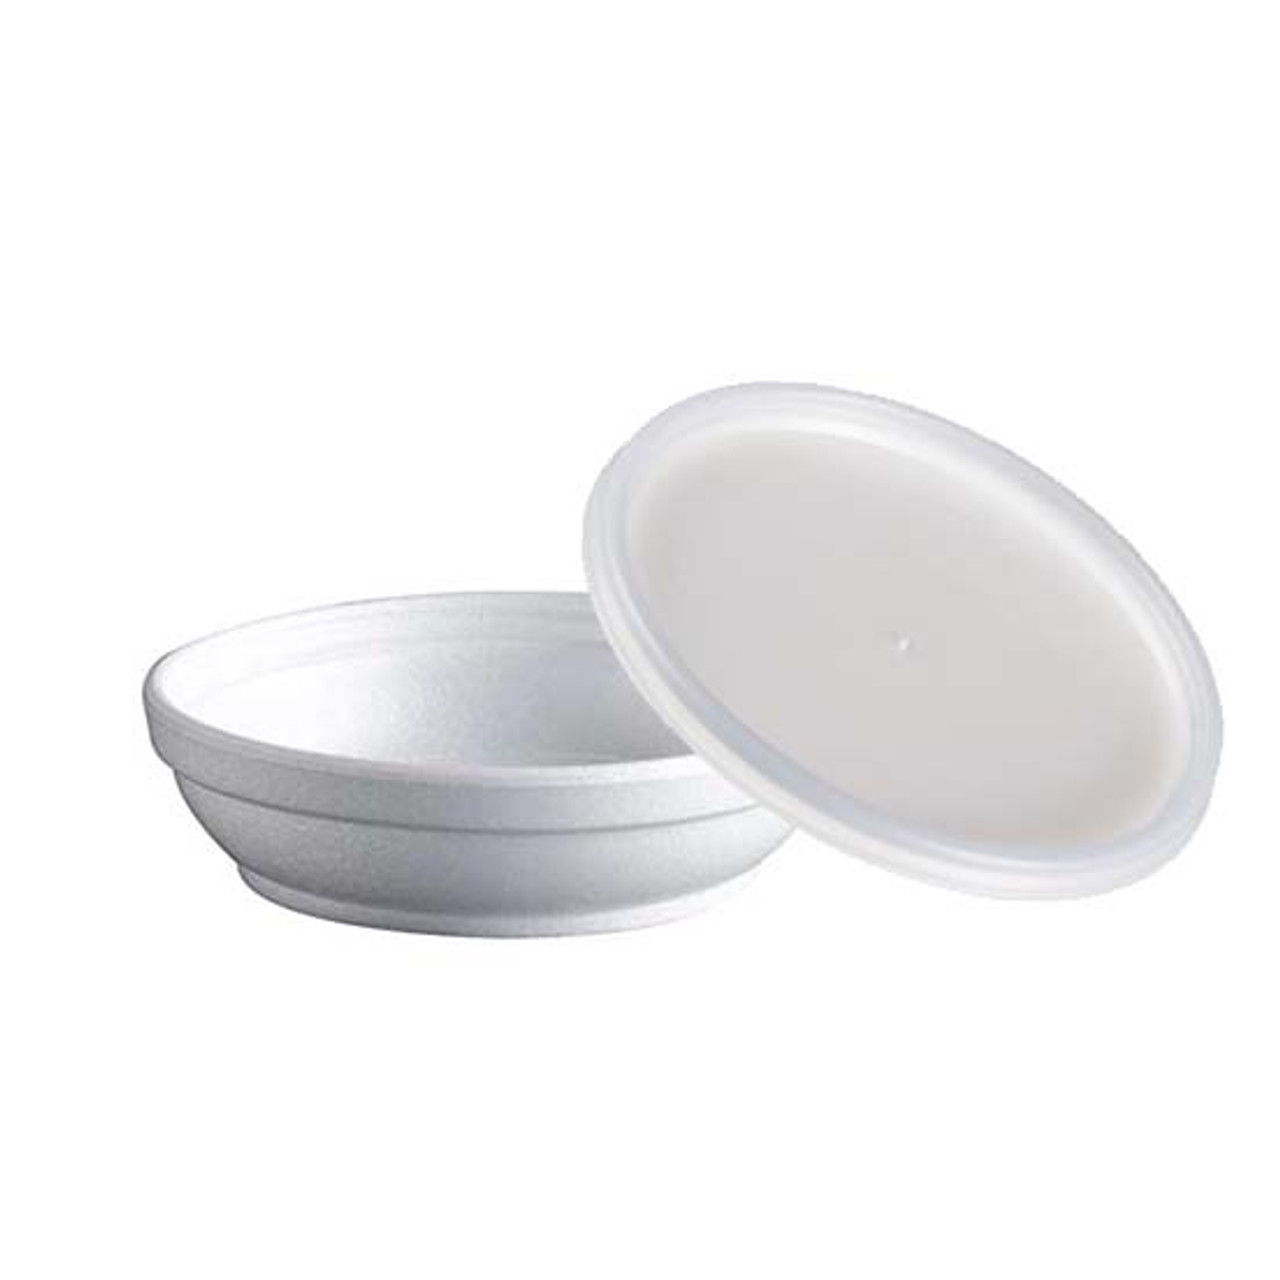 Dart 5oz. Insulated White Foam Container with optional lid - Case of 1000